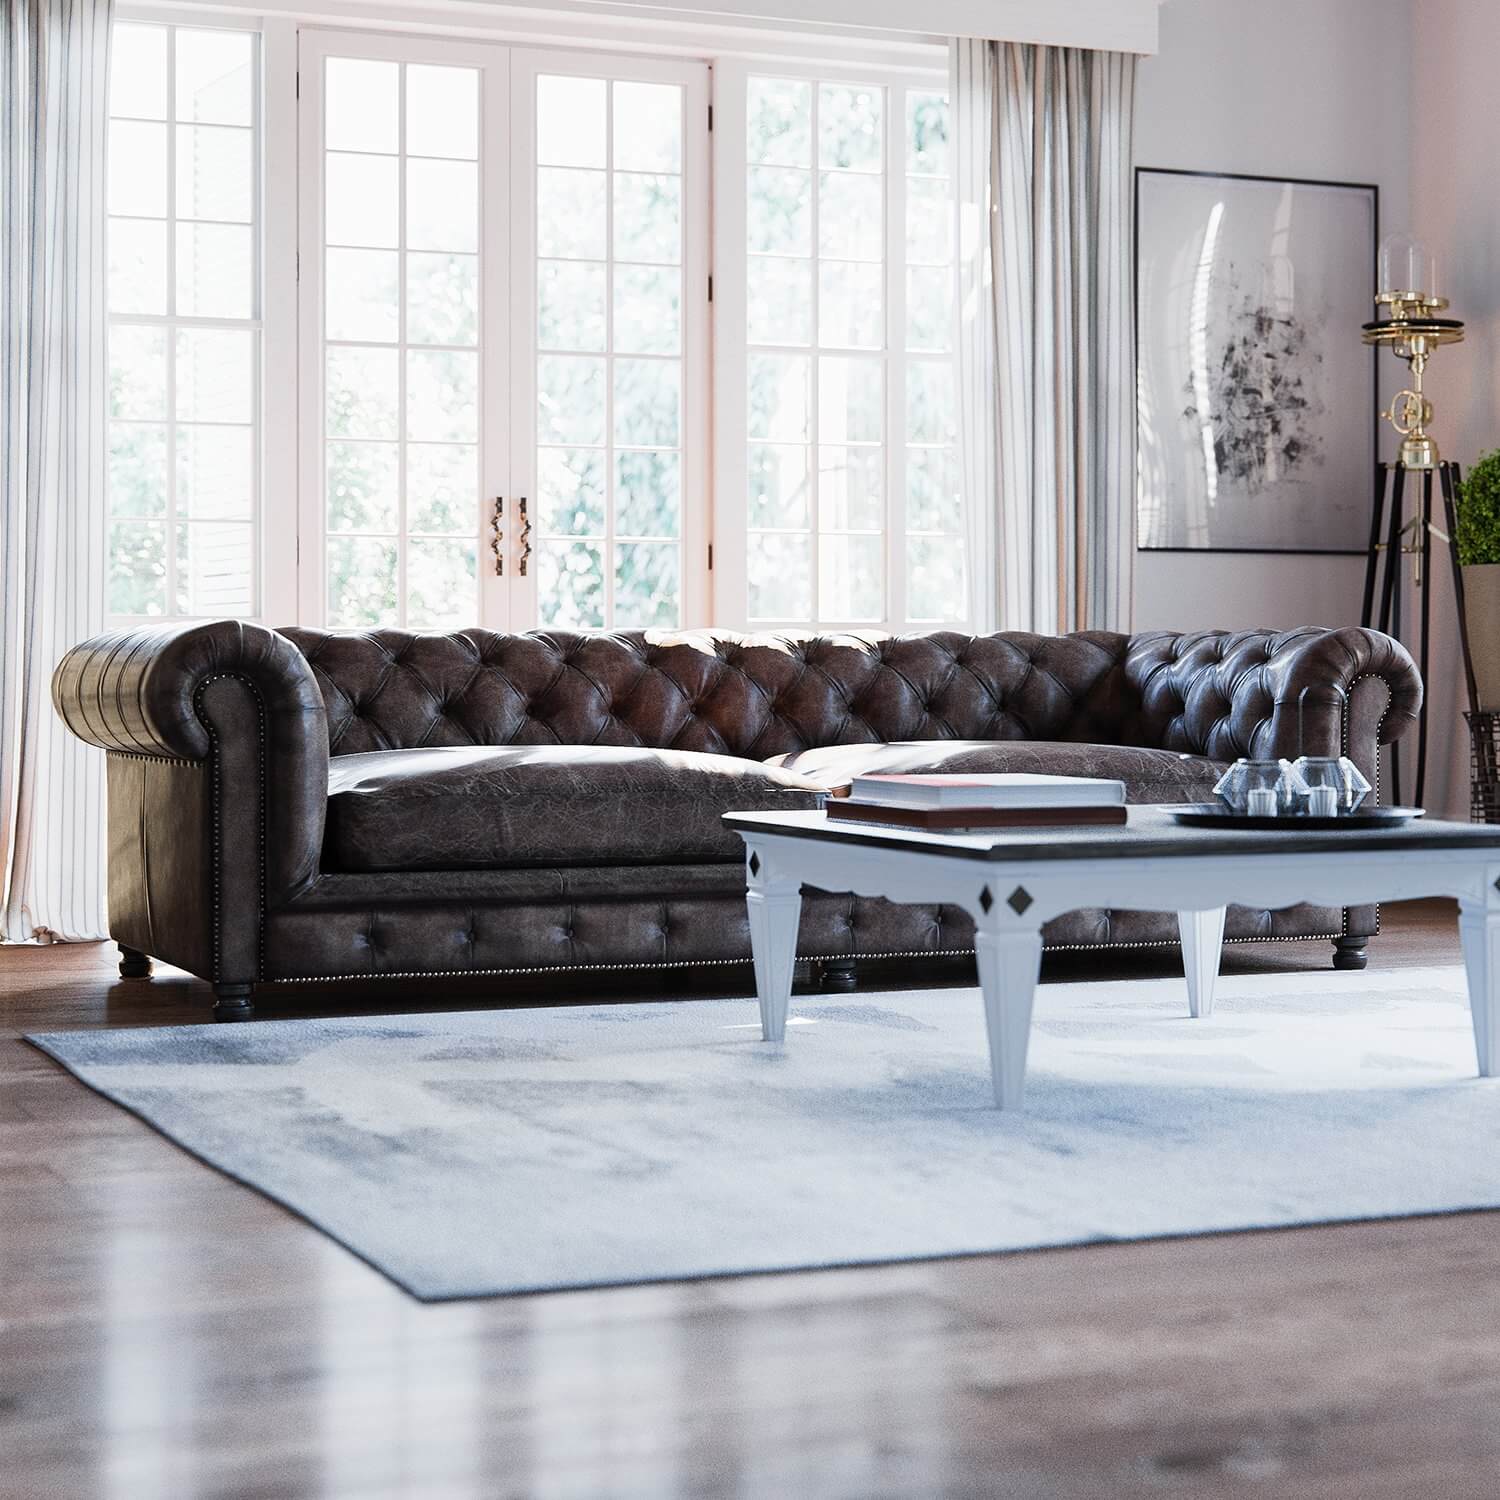 Classic flat living room leather couch - cgi visualization